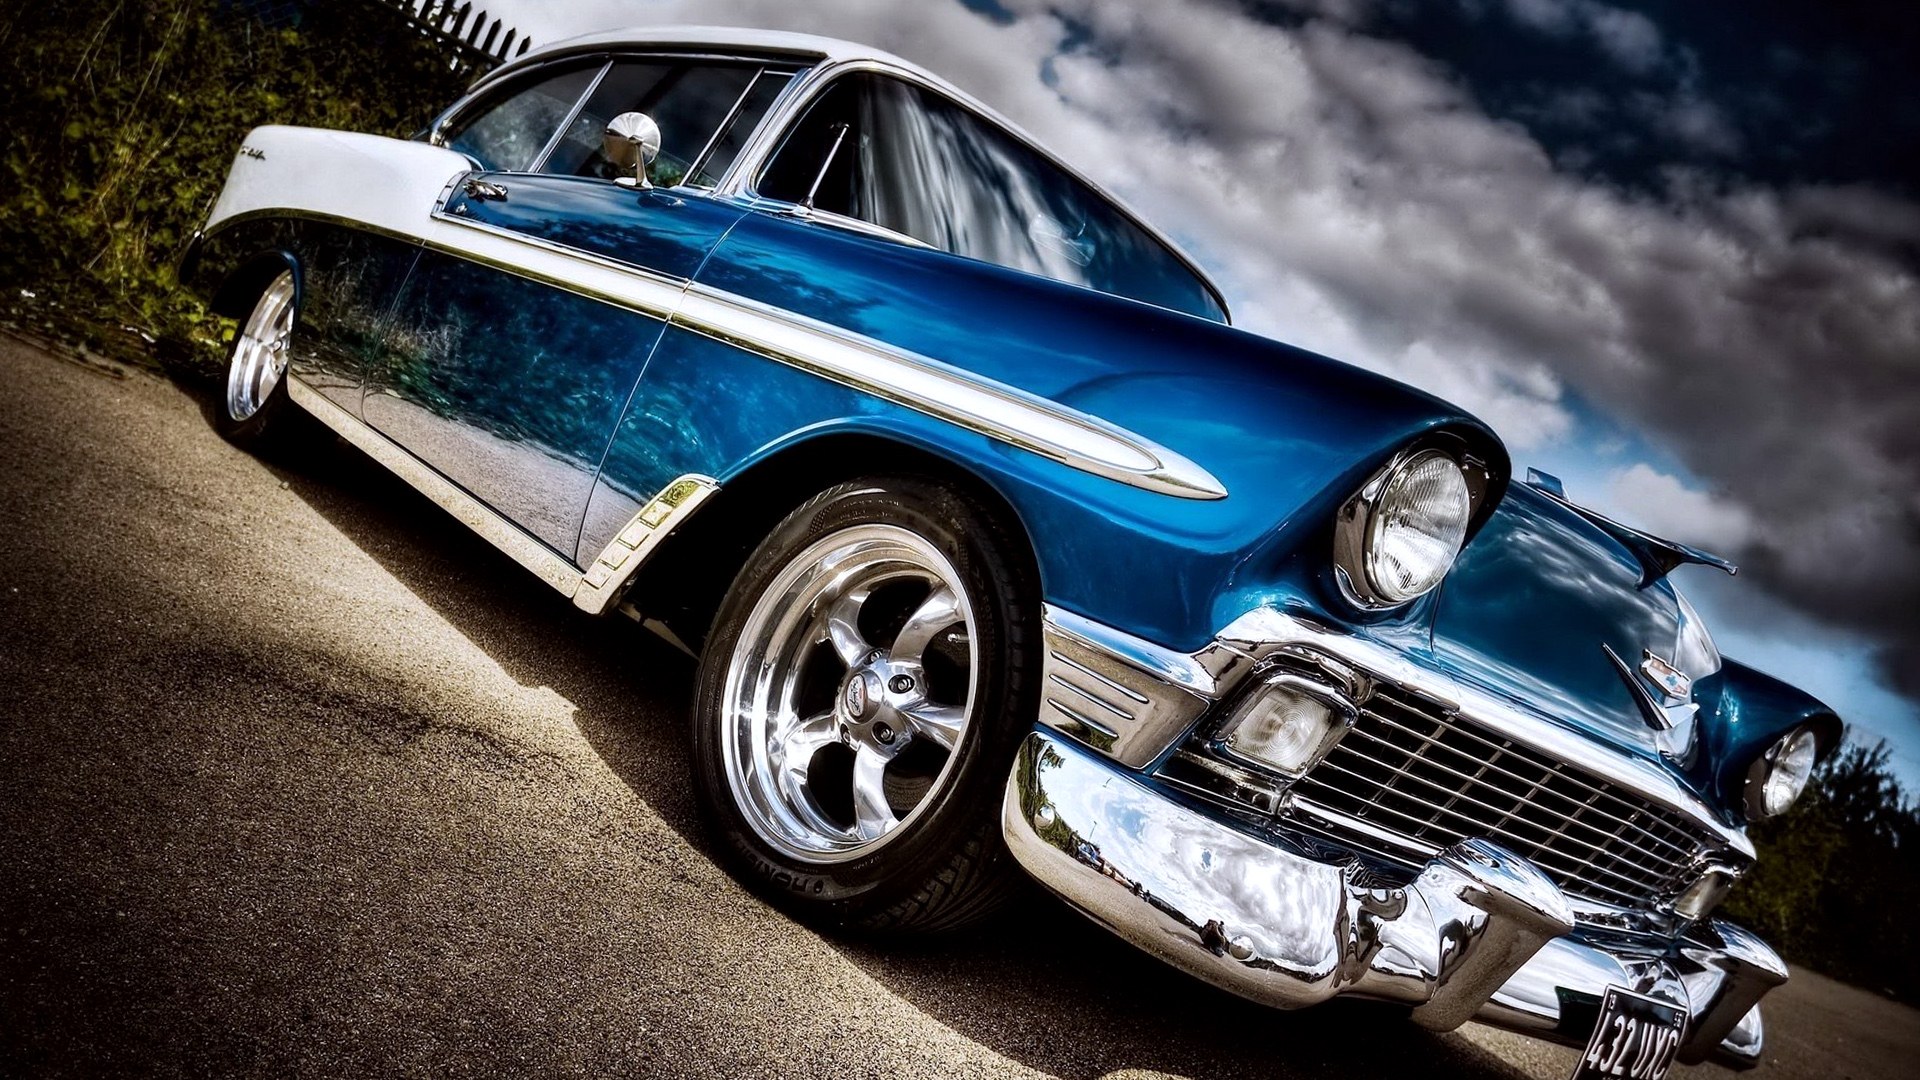 Chevy Car Image Wallpaper